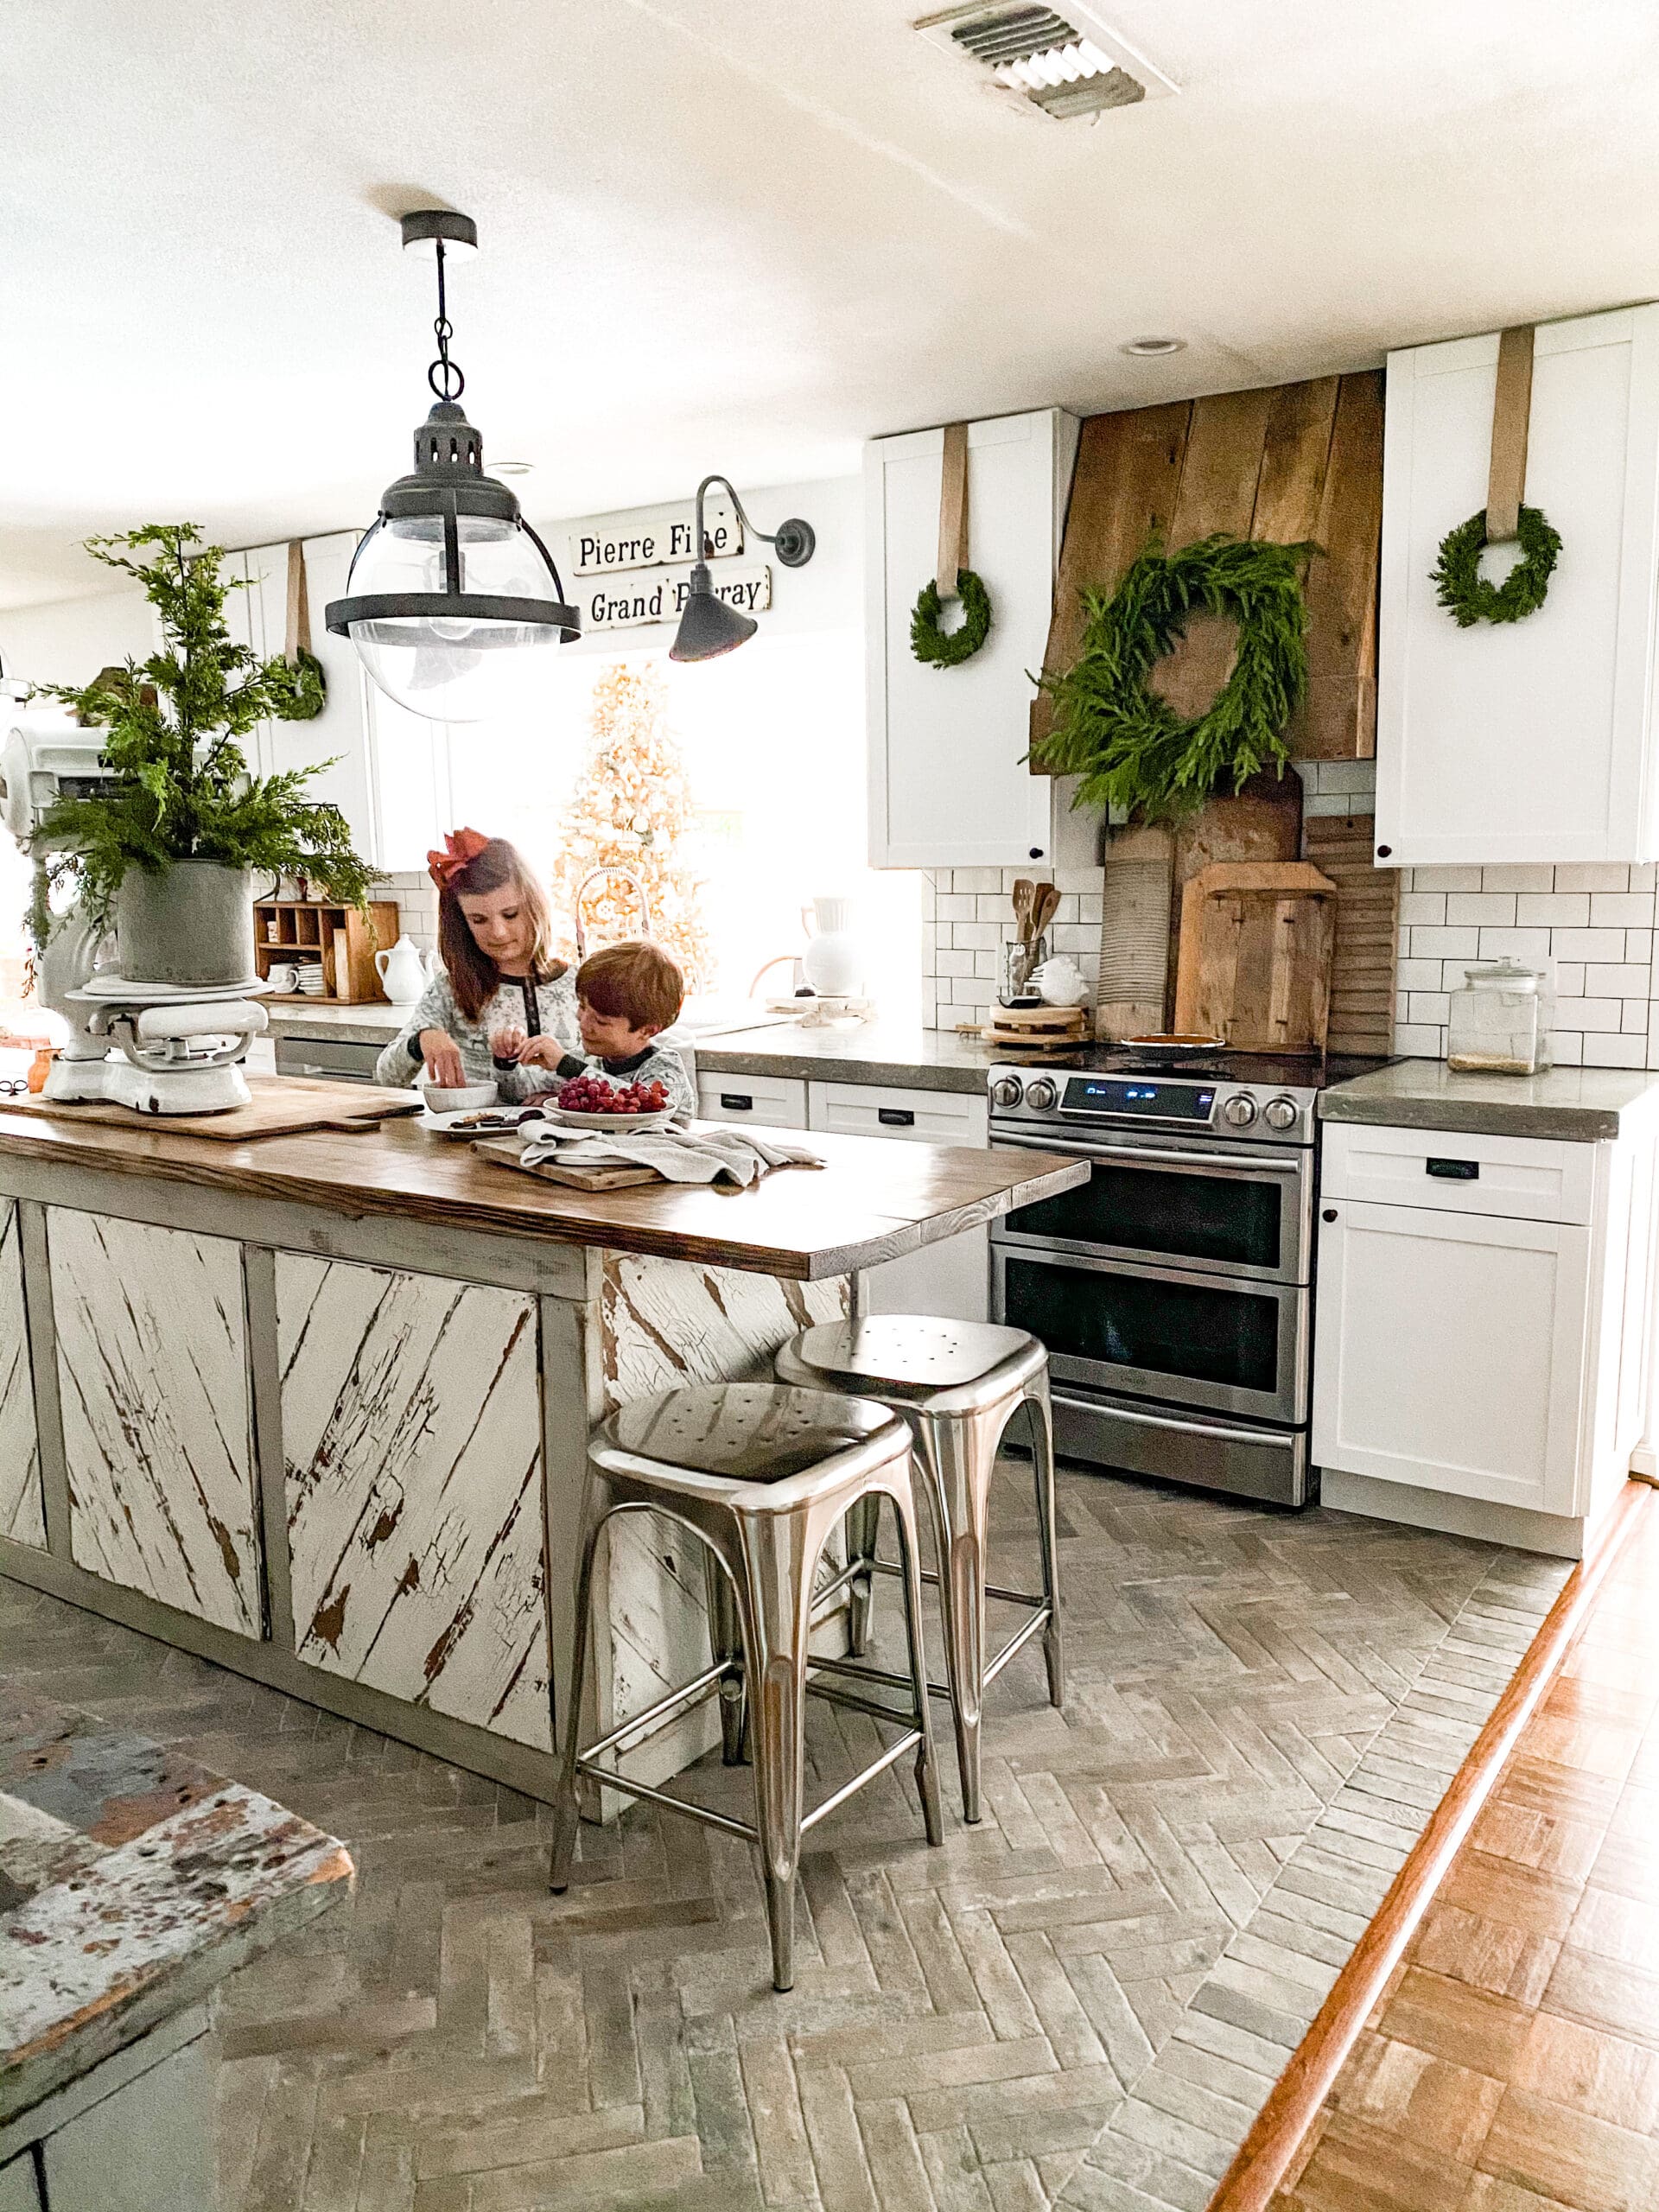 Addy and Harrison baking in the kitchen decorated with Christmas decor and greenery